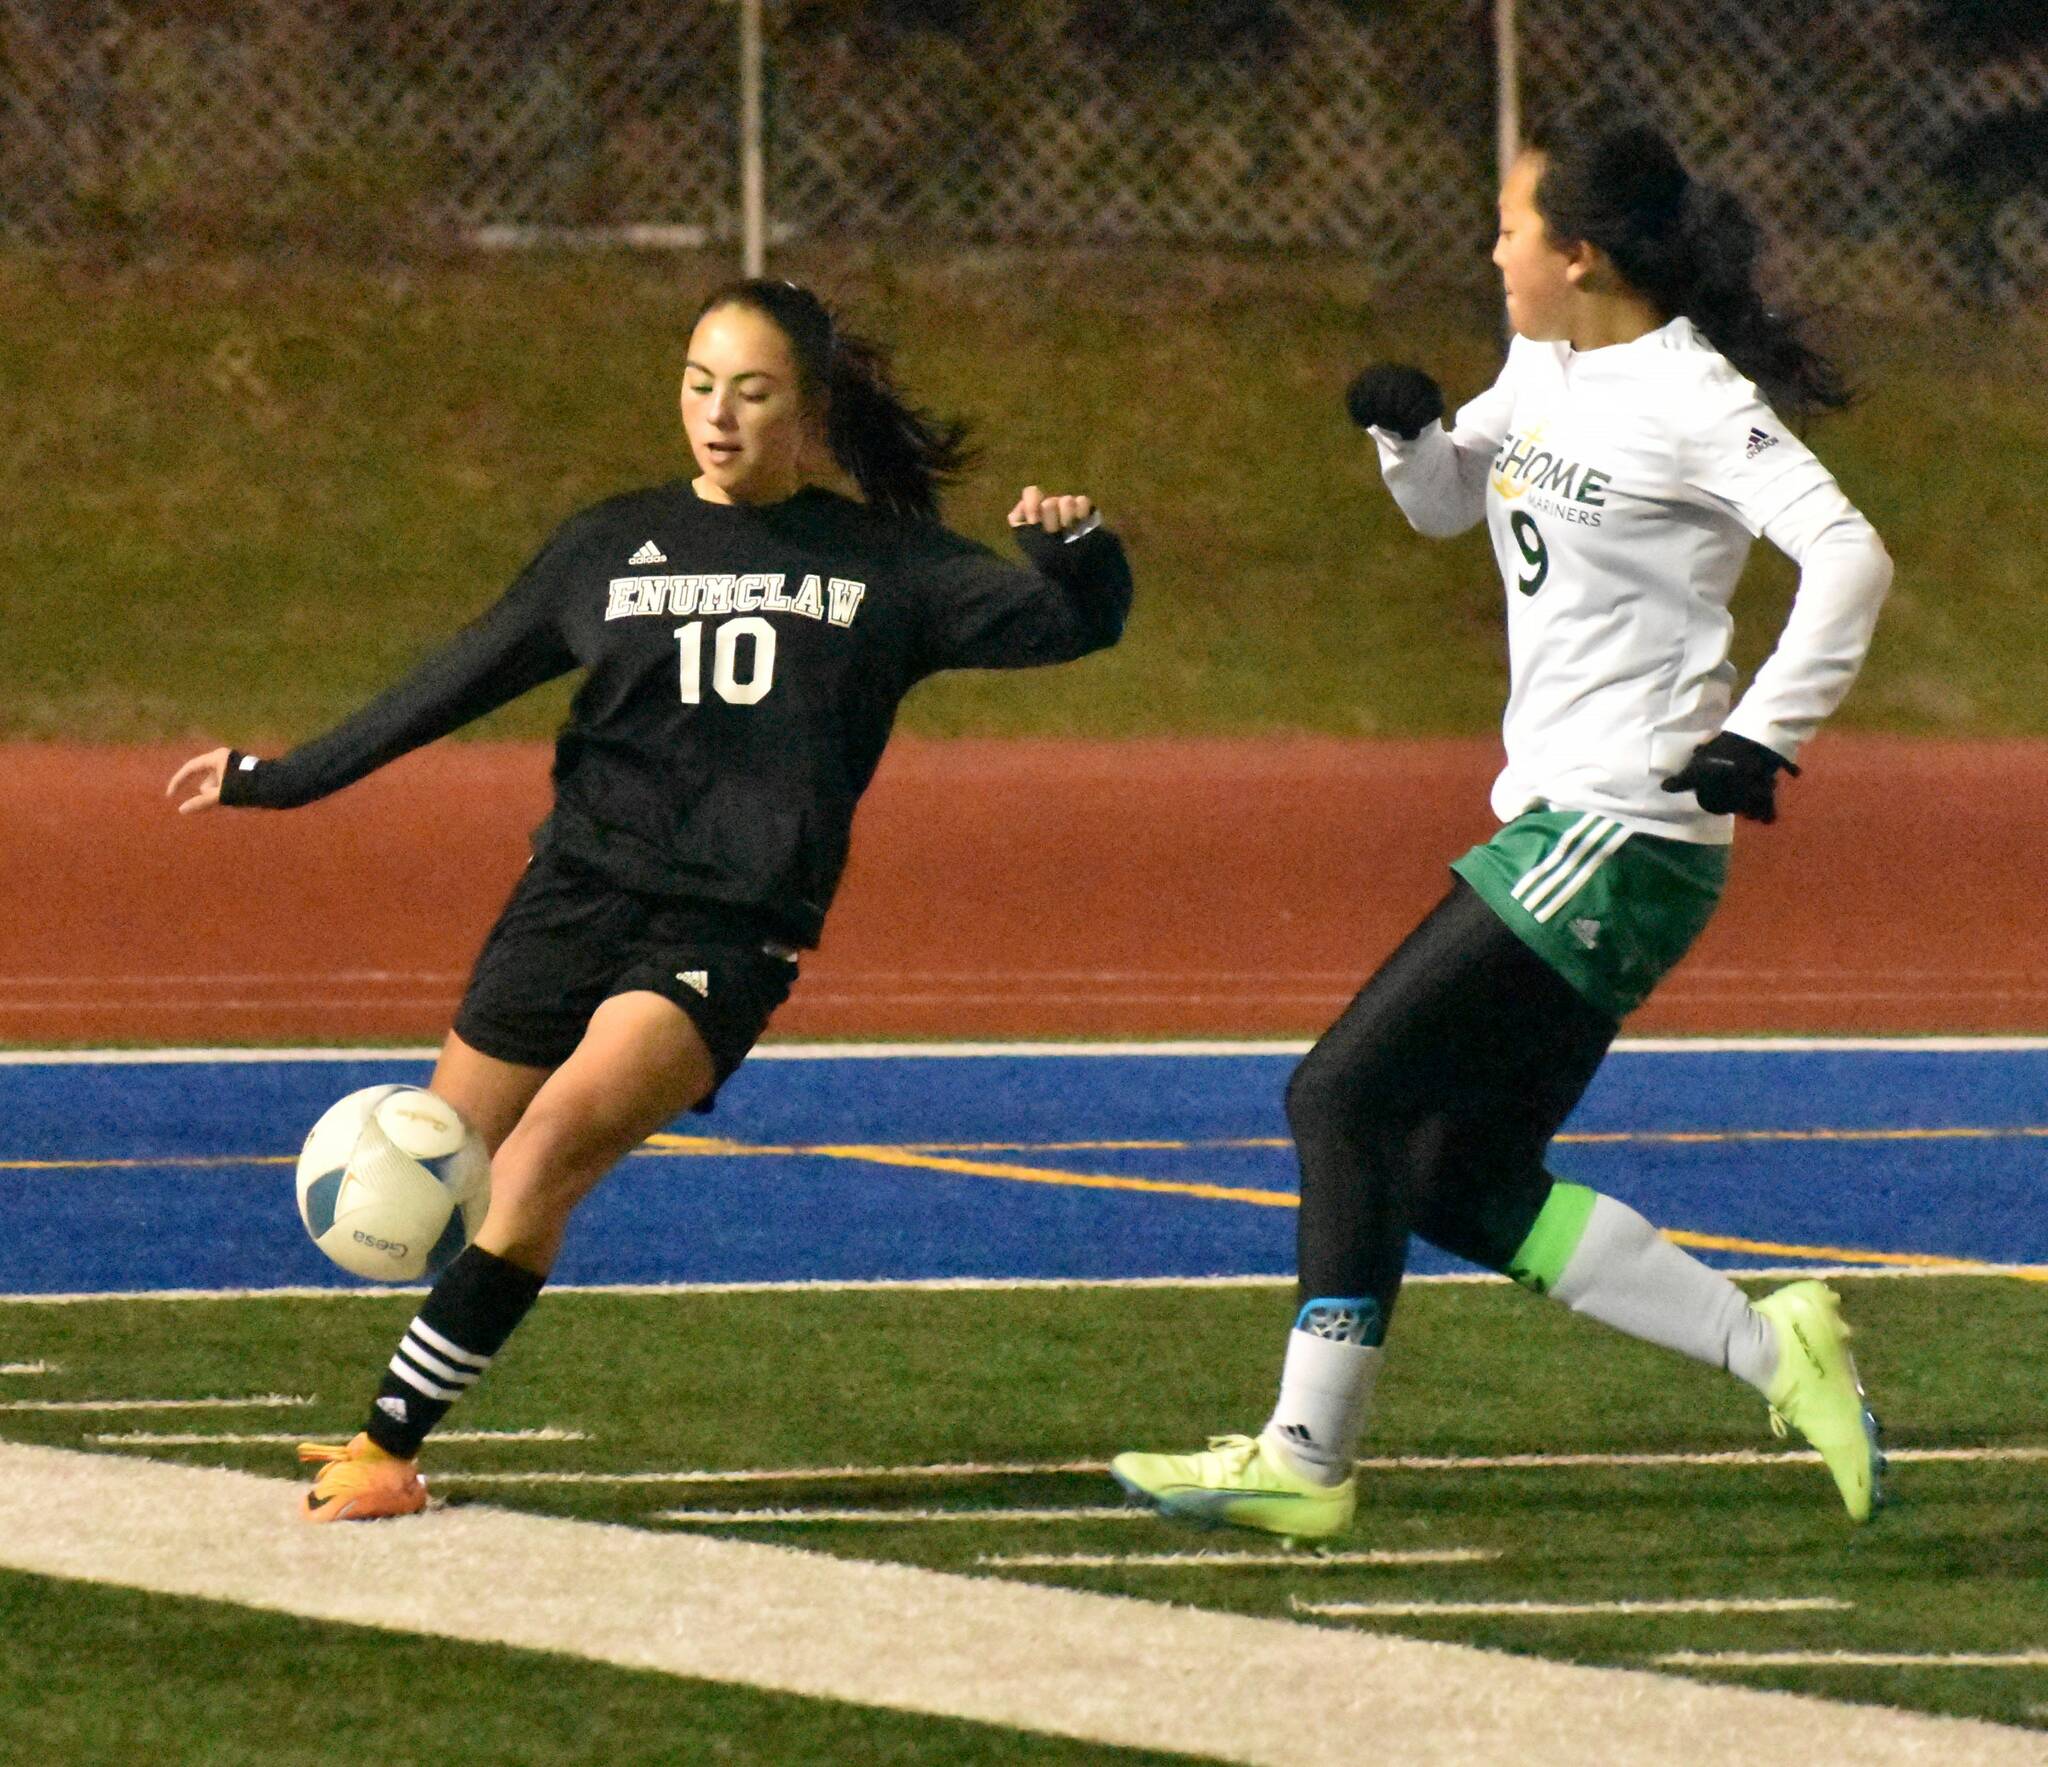 EHS soccer player Josie Schampera, last year’s all-league, is returning to the team as a senior. Photo by Kevin Hanson